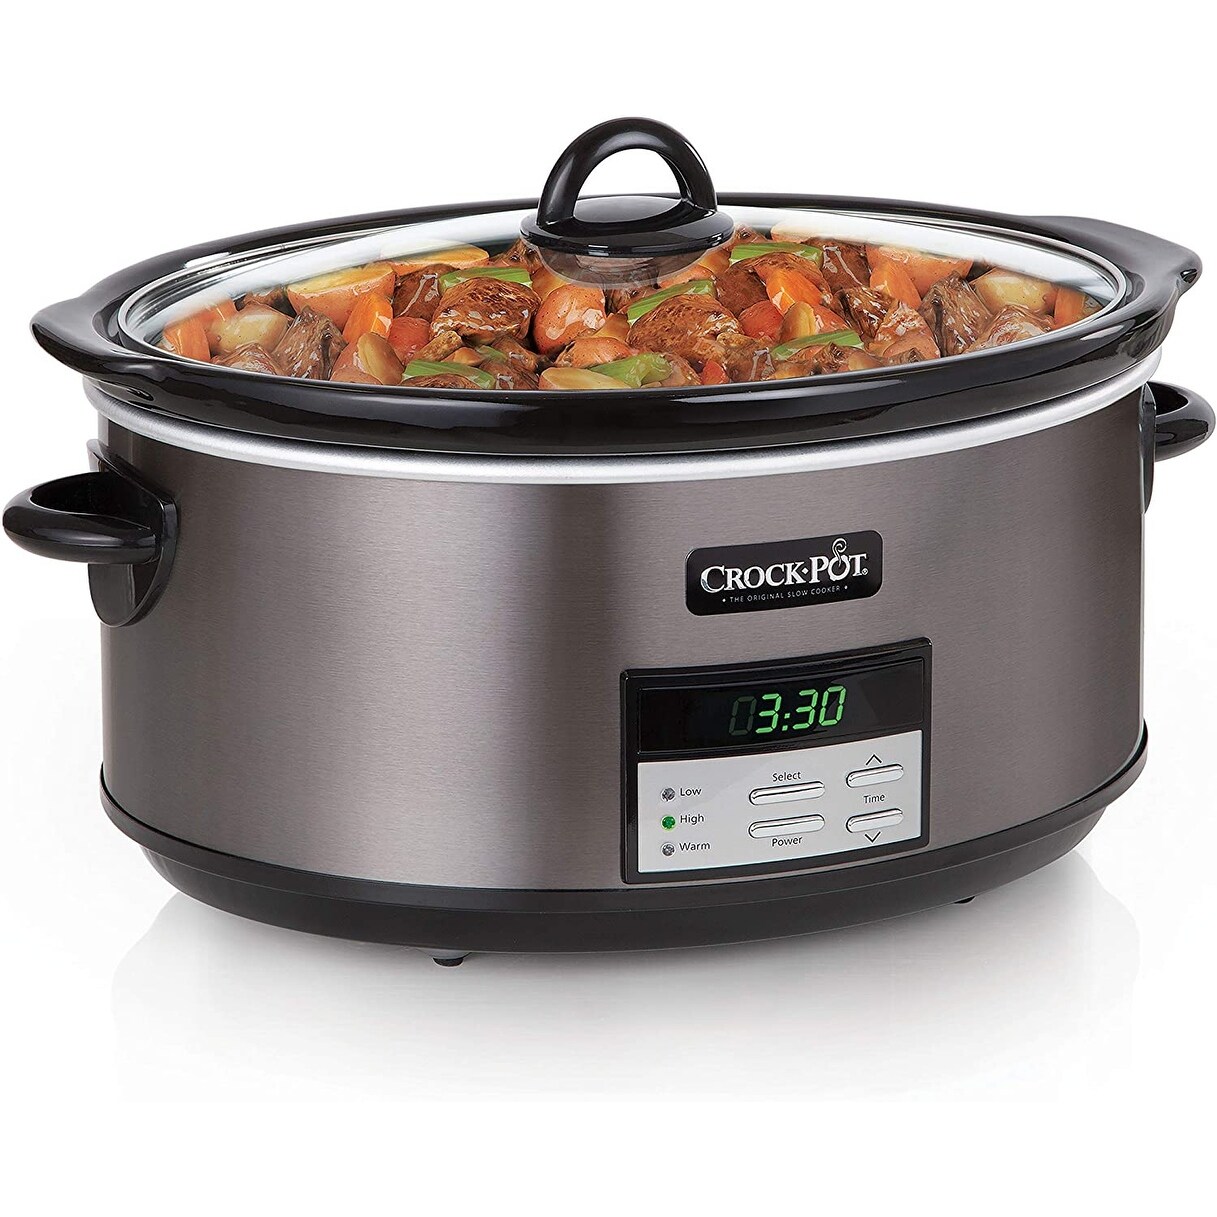 https://ak1.ostkcdn.com/images/products/is/images/direct/1101439908b56a986ca723a4fe4832eaebbecb0d/8-Quart-Slow-Cooker-with-Auto-Warm-Setting-and-Cookbook%2C-Black-Stainless-Steel.jpg